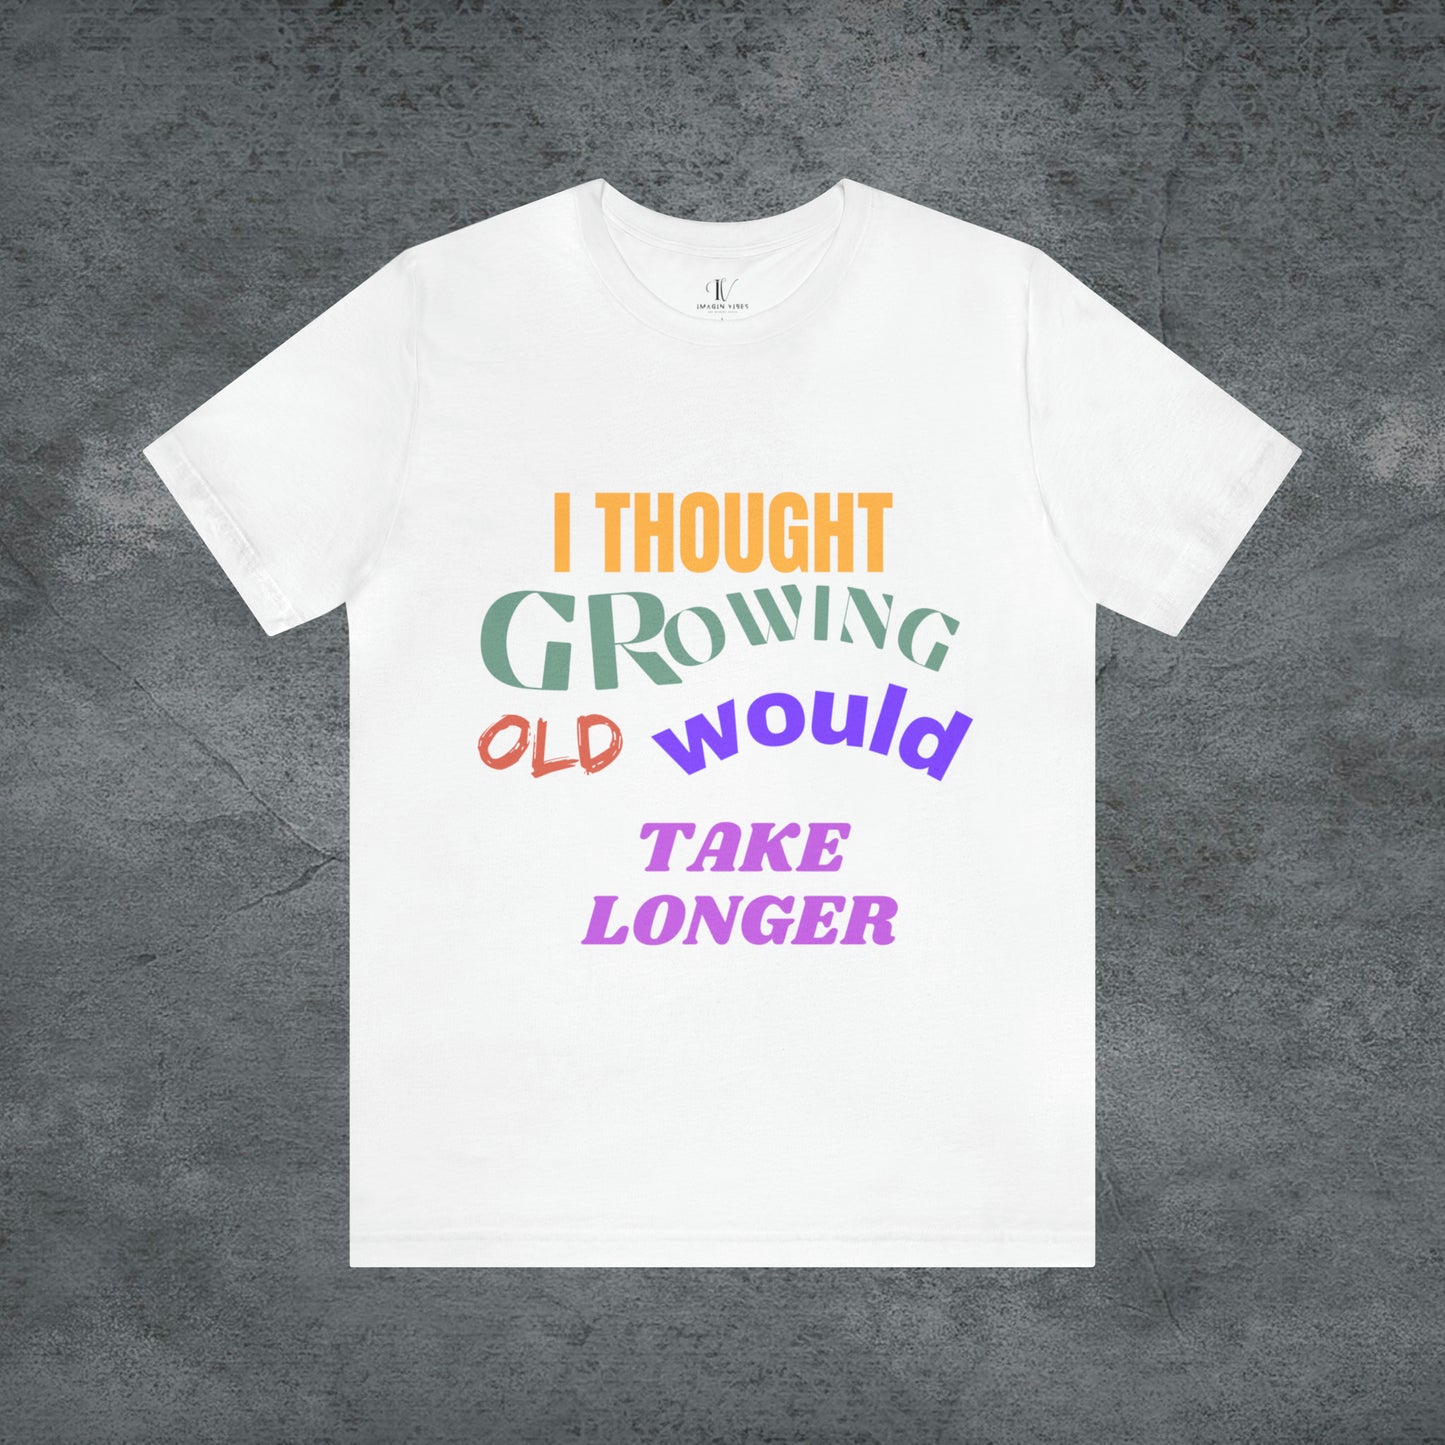 I Thought Growing Old Would Take Longer T-Shirt - Getting Older T-Shirt - Funny Adulting Tee - Old Age T-Shirt - Old Person T-Shirt T-Shirt White S 